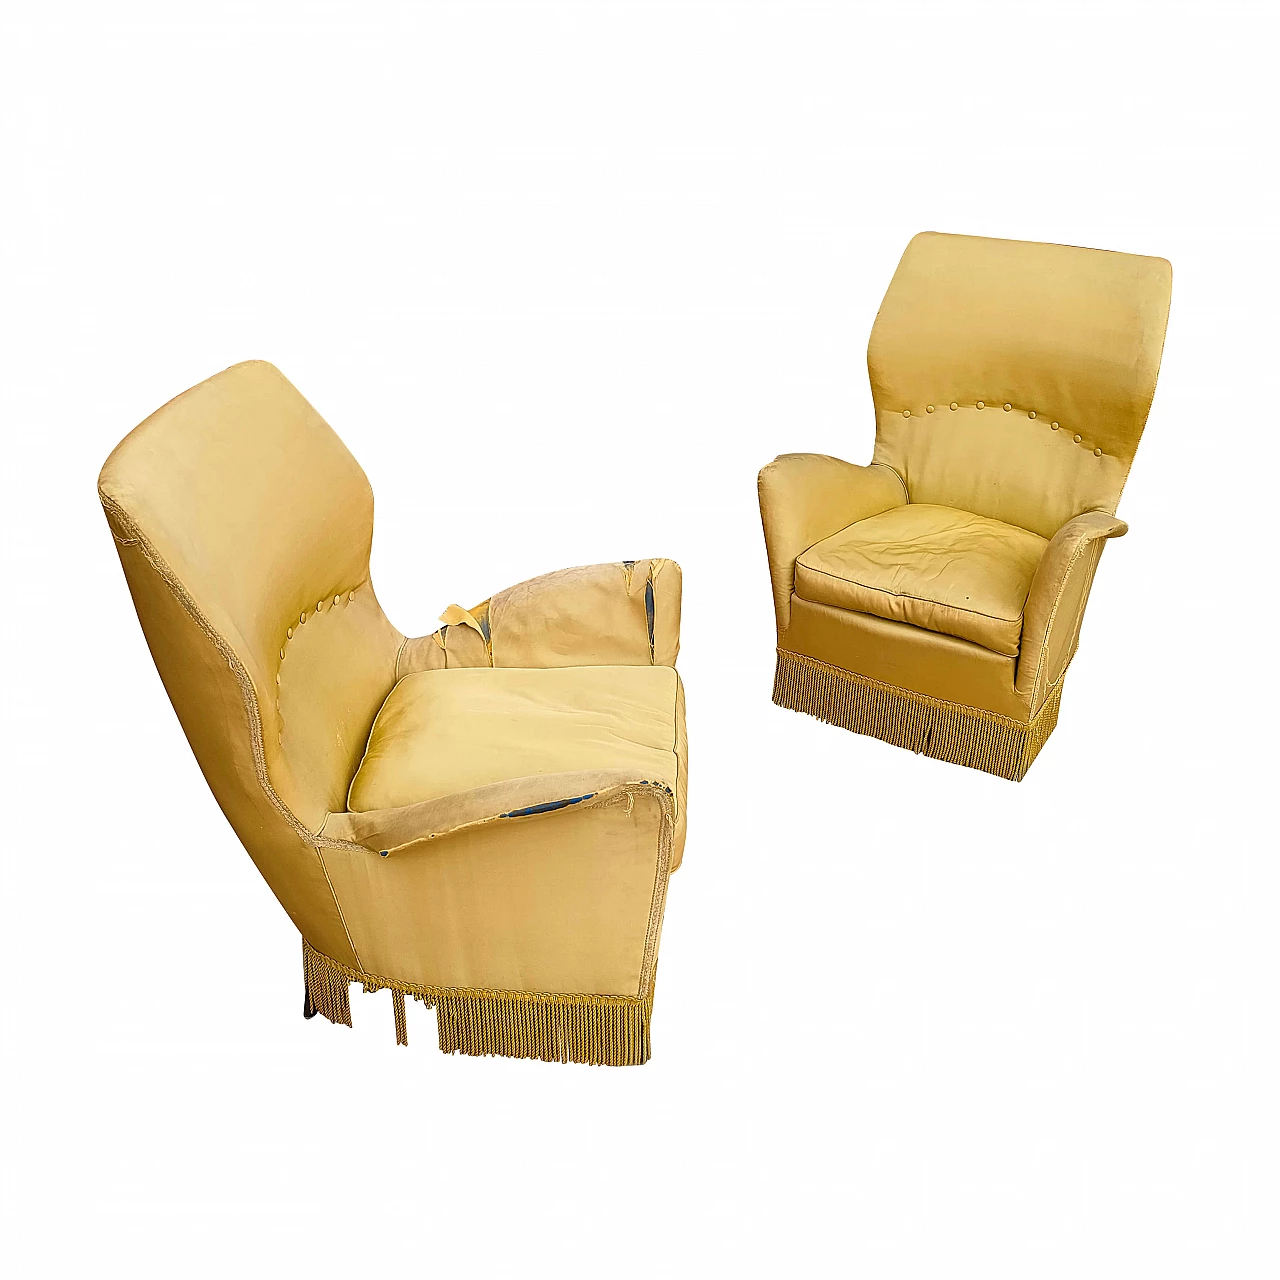 Pair of armchairs attributed to Gio Ponti for Isa Bergamo, 1950s 1304450